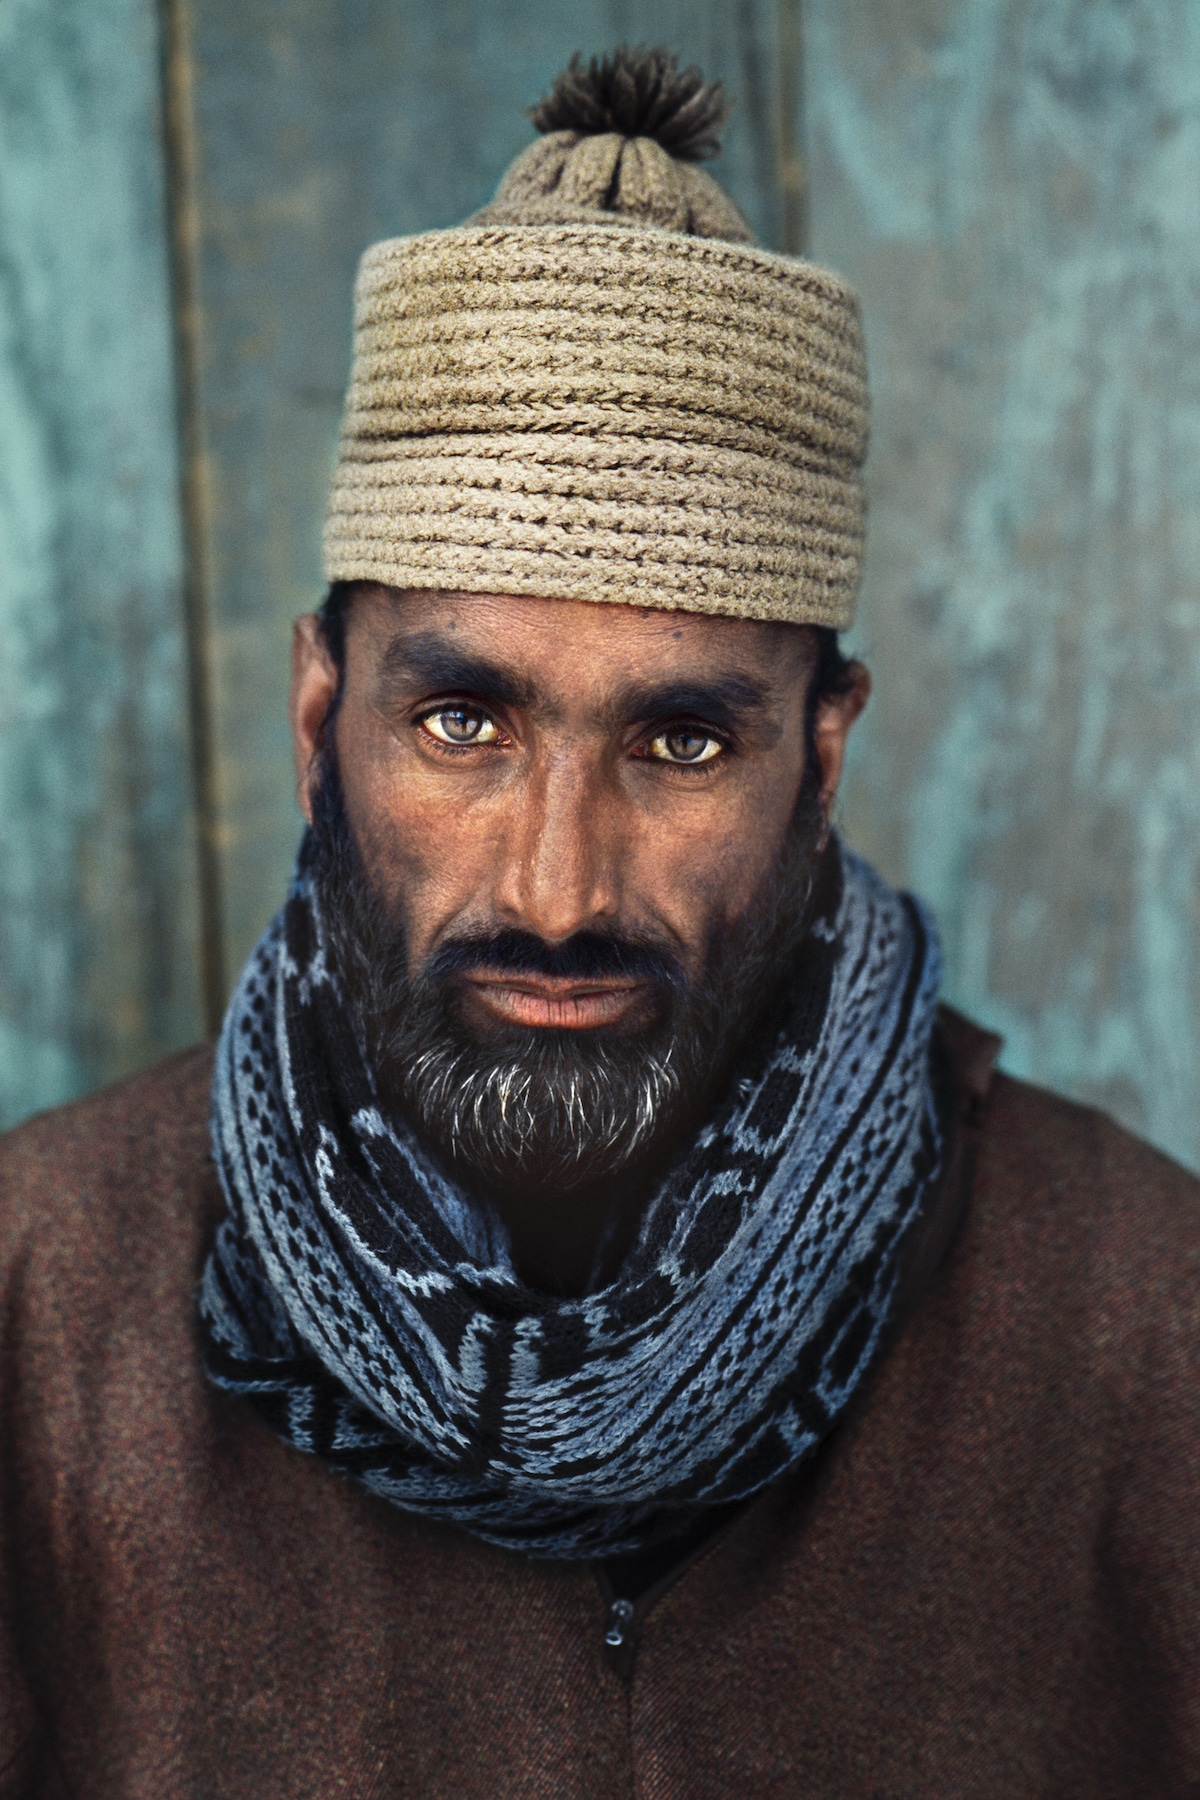 Steve-McCurry-In-Search-Of-Elsewhere-10